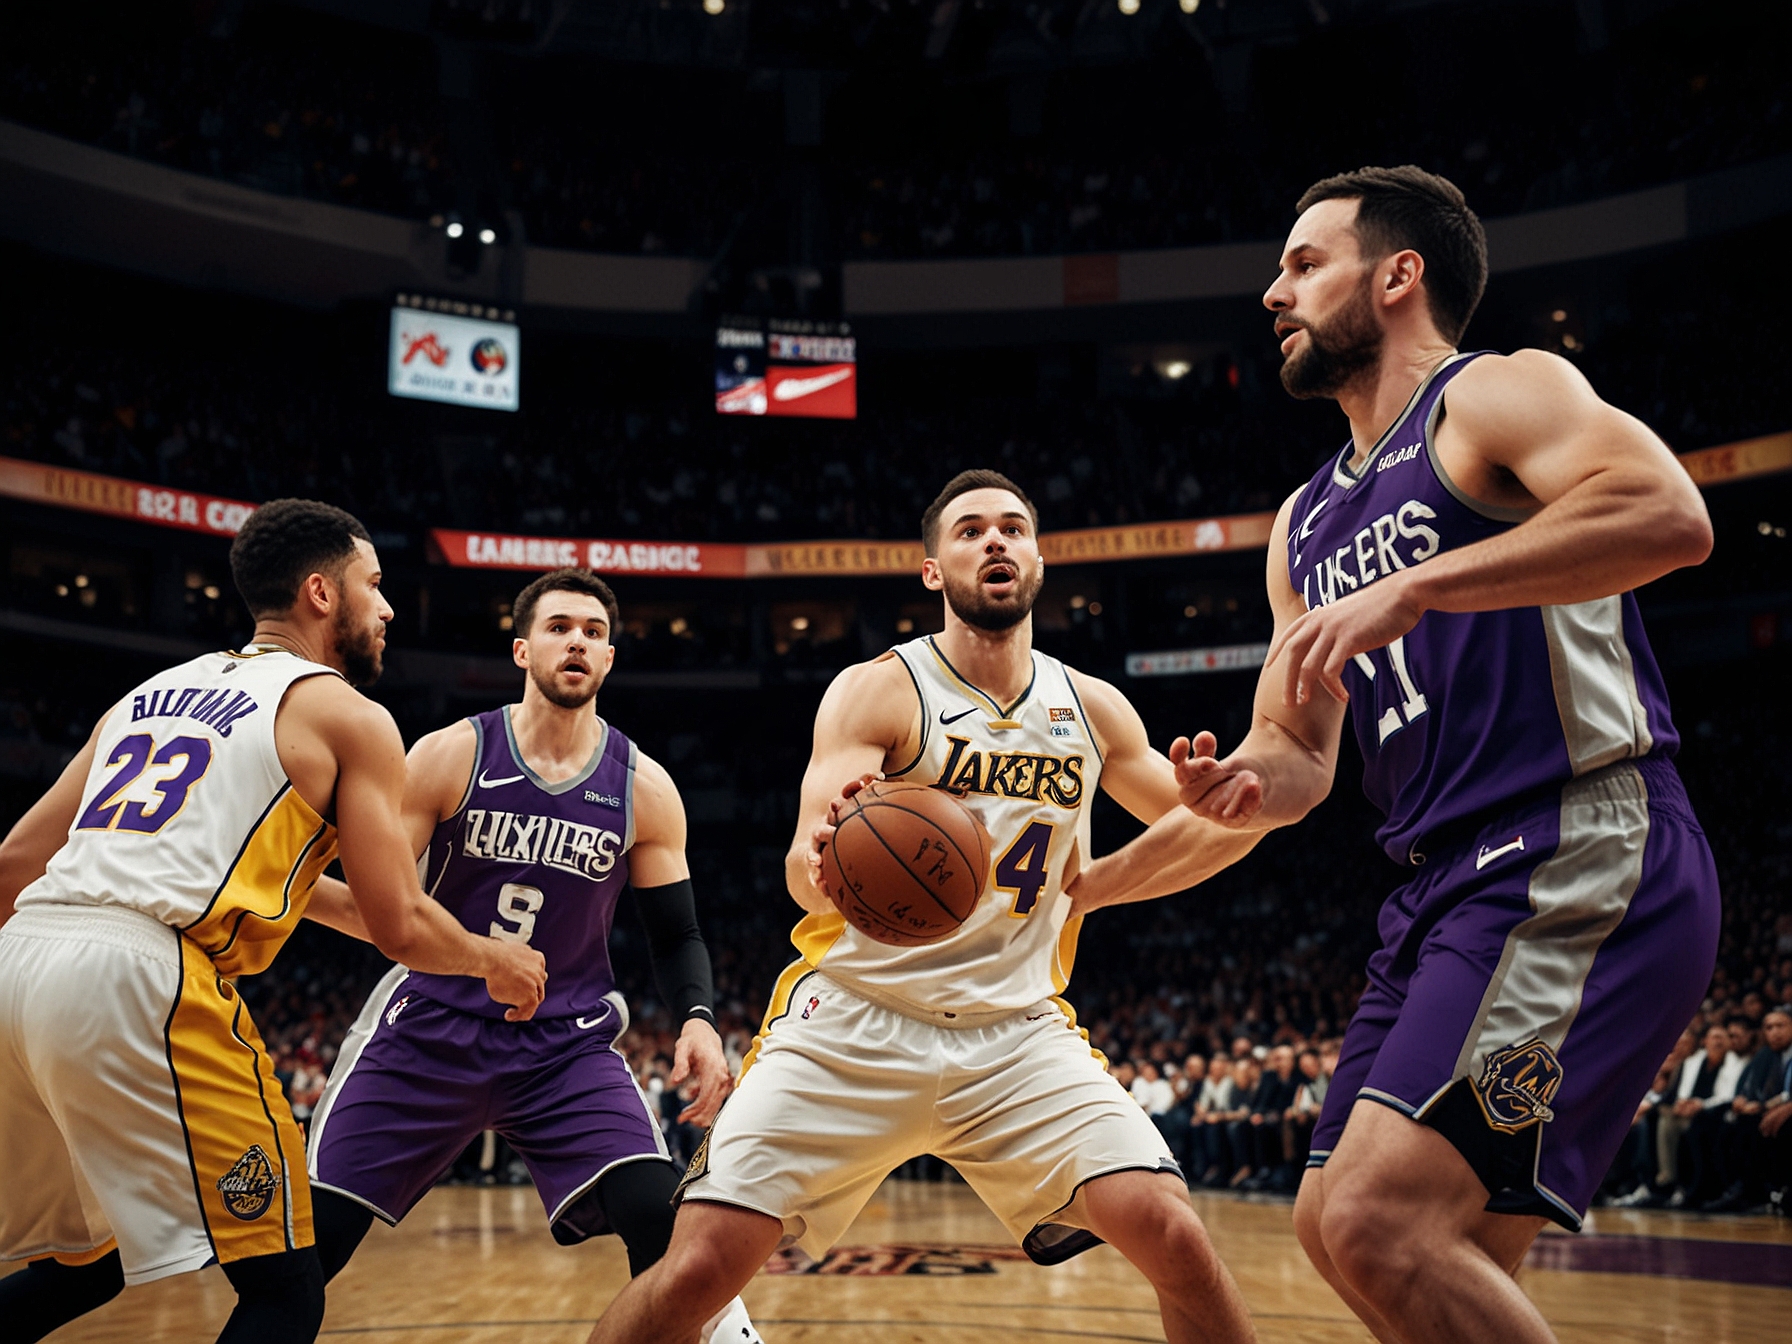 A dynamic shot of a Lakers' game with players in action, representing the team's anticipated shift to modern and innovative basketball strategies under Redick's coaching.